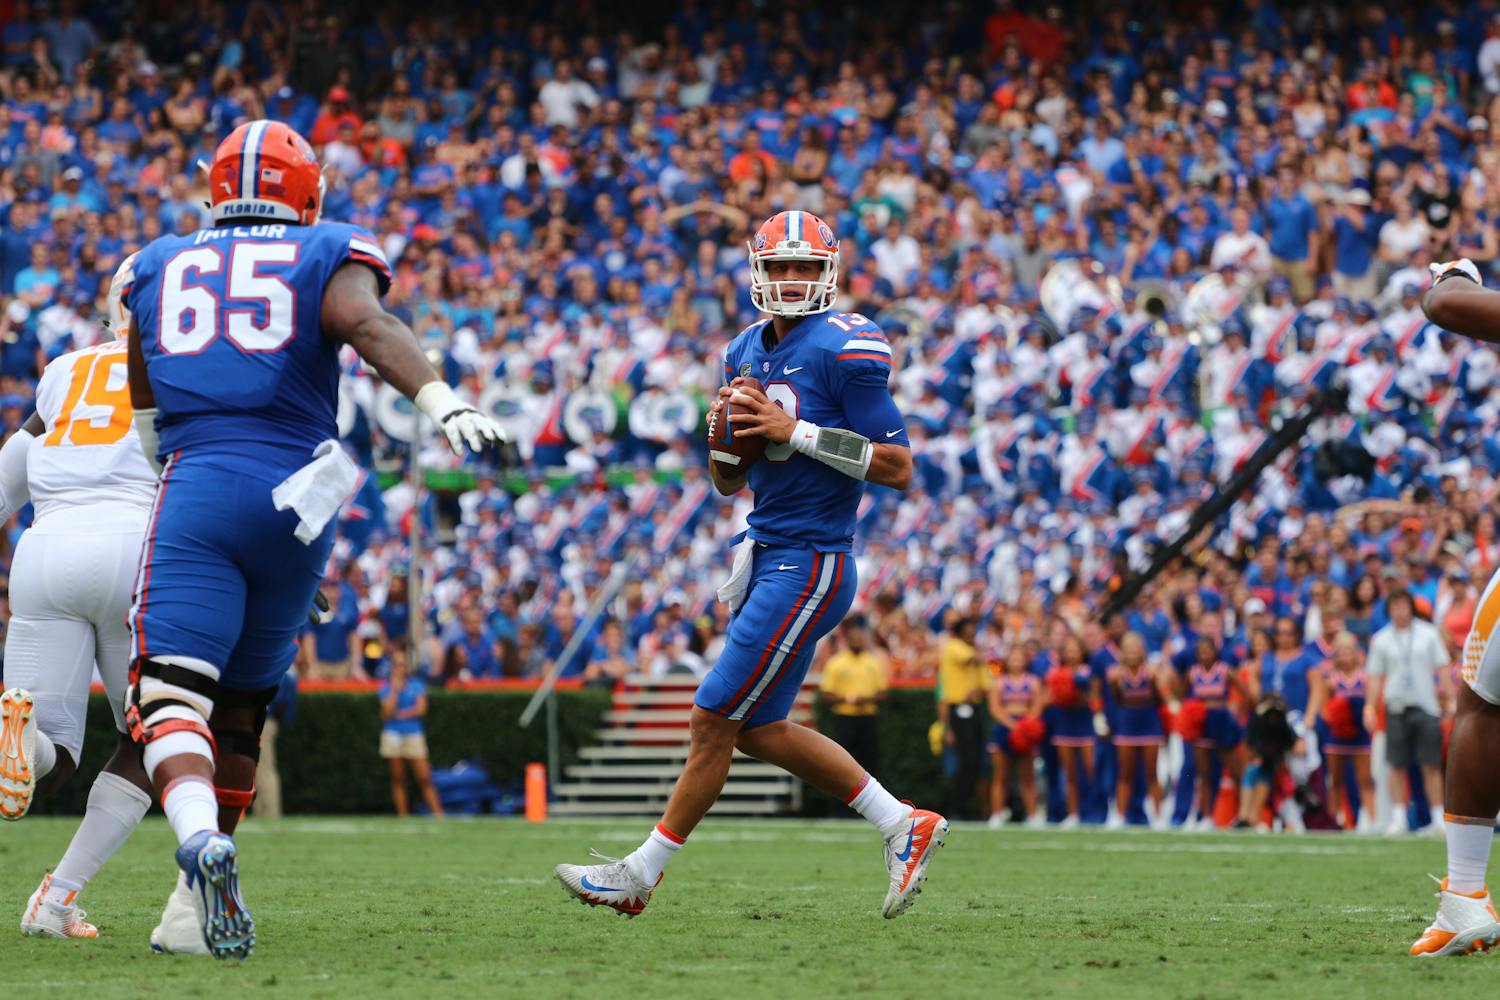 UF quarterback Feleipe Franks looks to pass the ball during Florida's 26-20 win over Tennessee on Saturday at Ben Hill Griffin Stadium. 